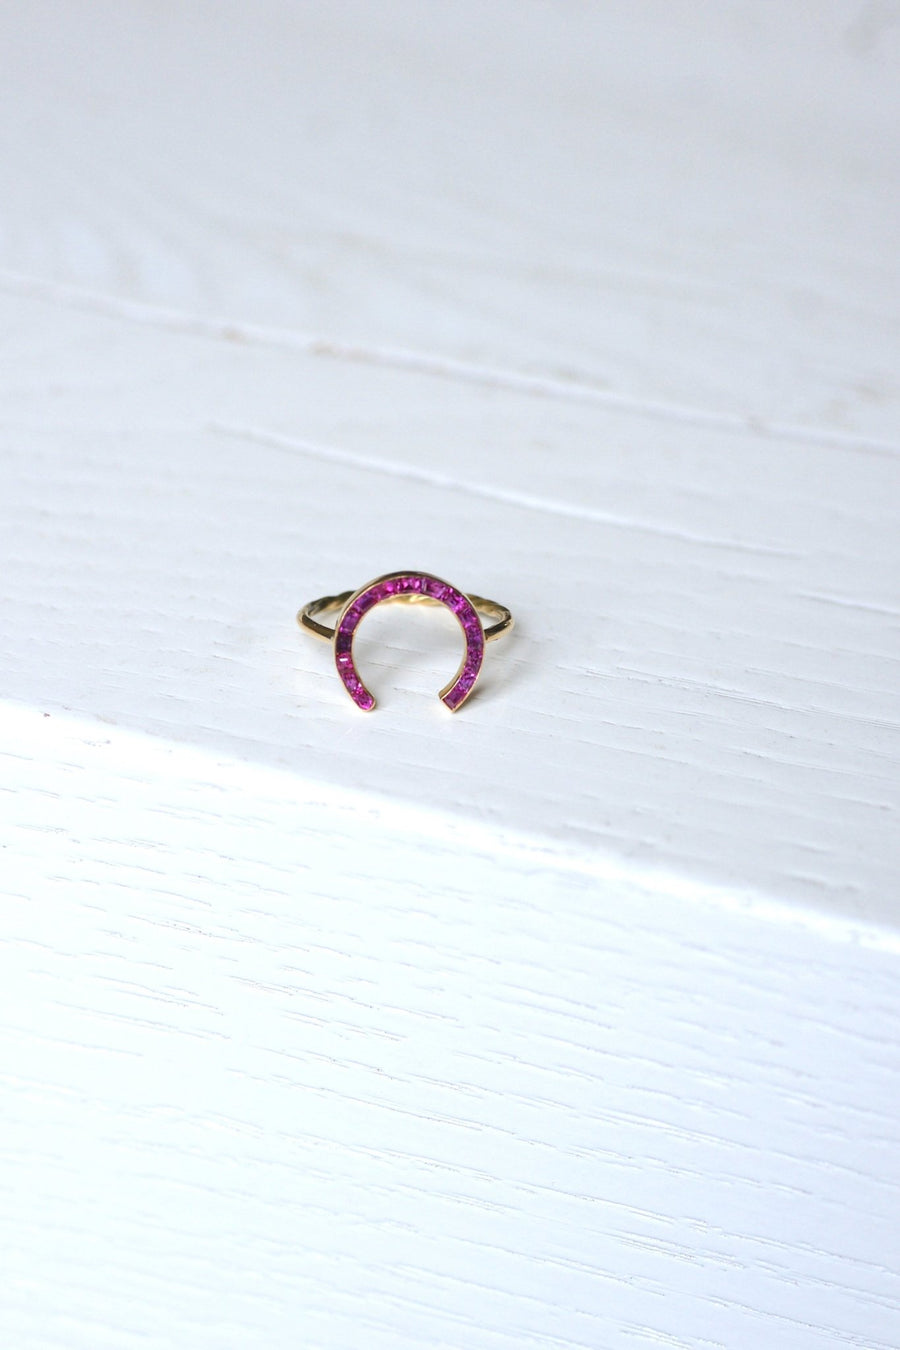 Antique pink gold and ruby horseshoe ring - Penelope Gallery